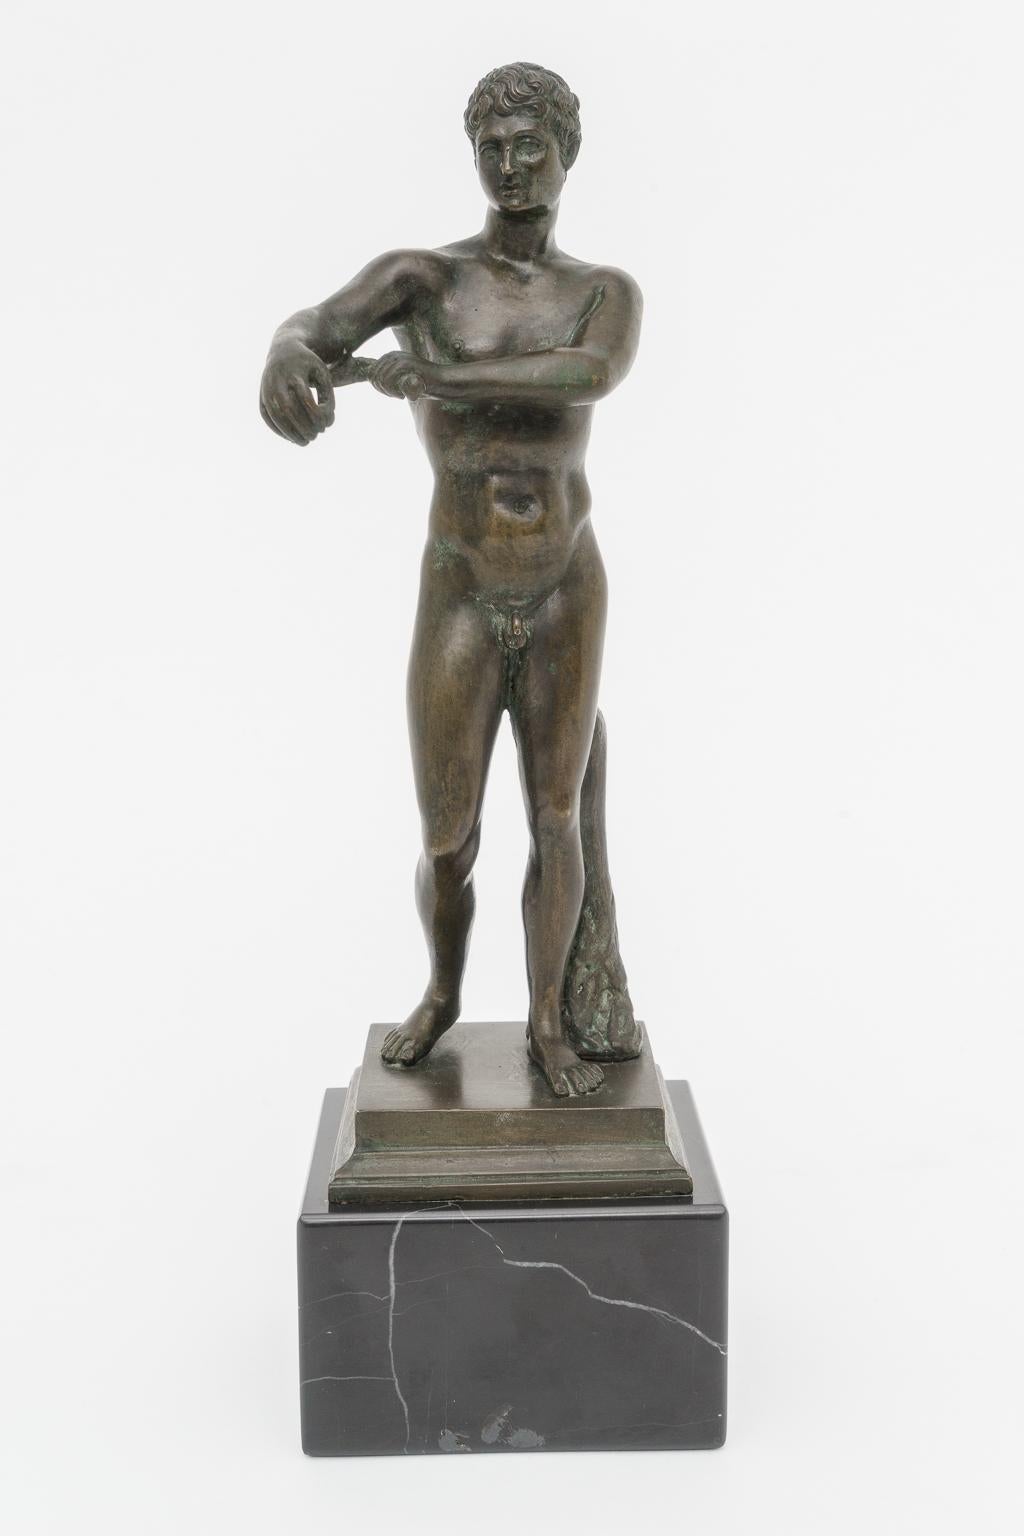 This stylish and Classic figure of an athlete was acquired from a Palm Beach estate and it dates to the late 19th and was a piece one would have acquired while on the 